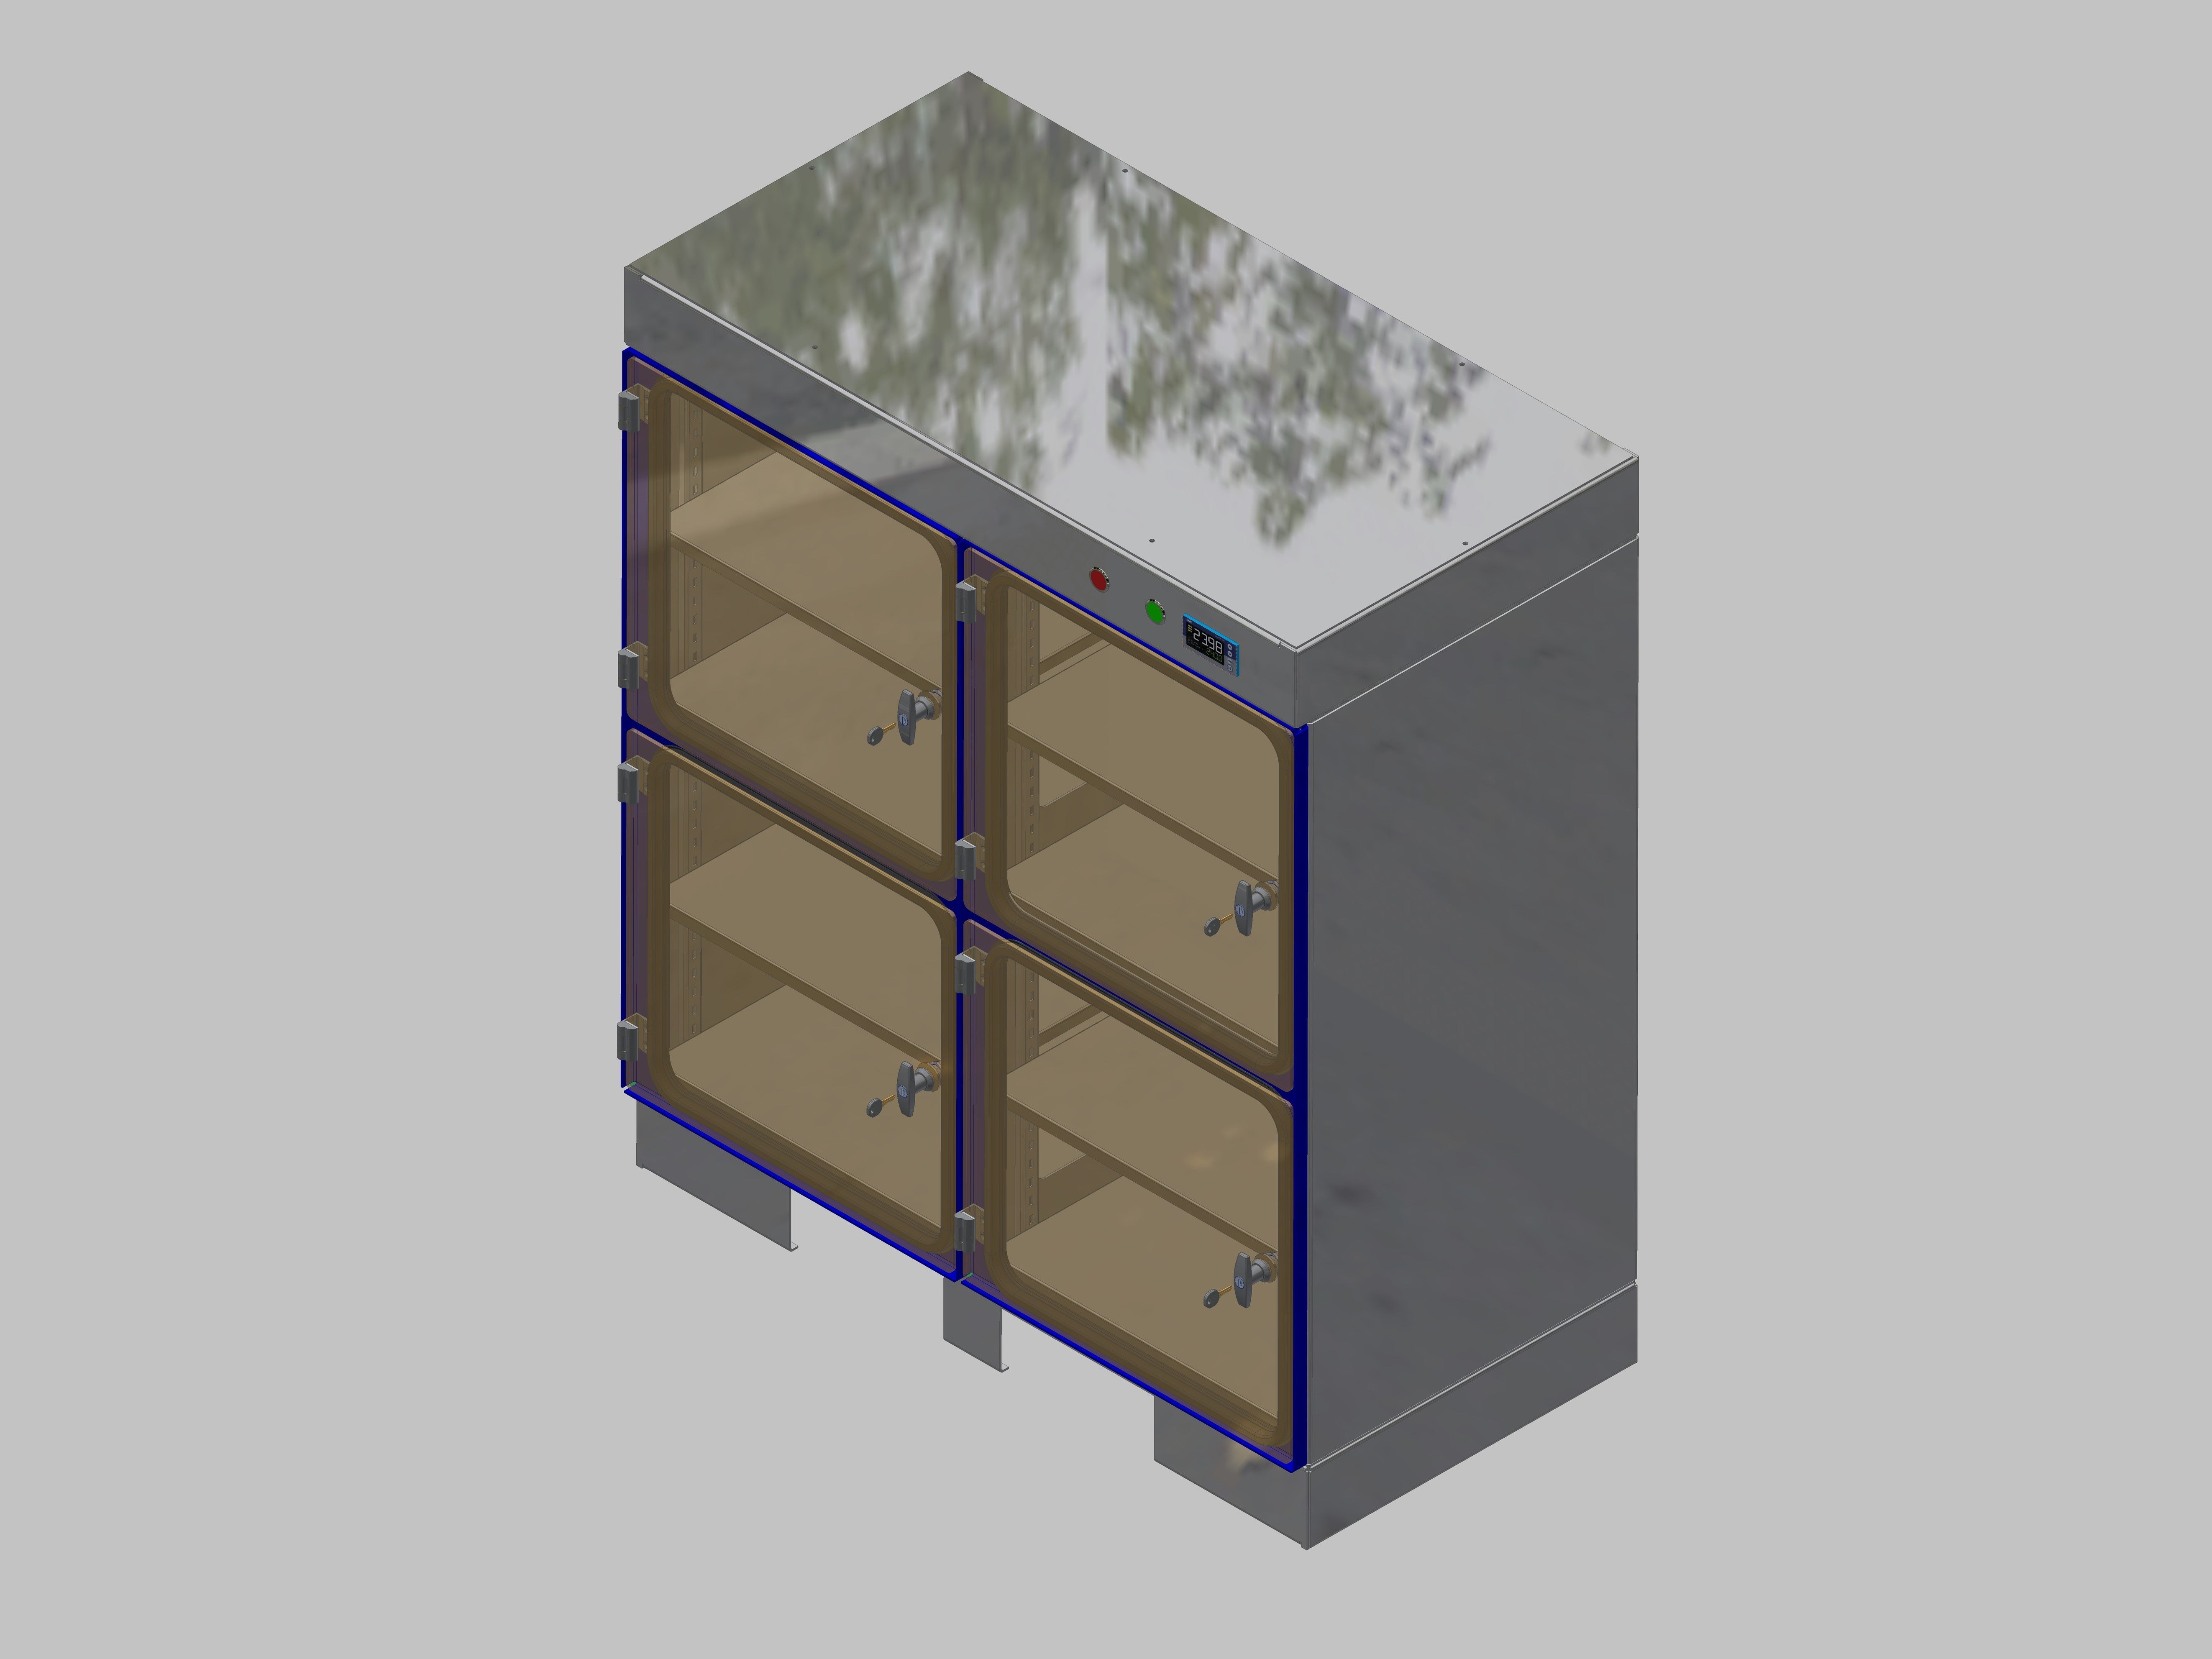 Dry storage cabinet-ITN-1200-4 with 2 shelves per compartment and base design that can be accessed with adjustable feet